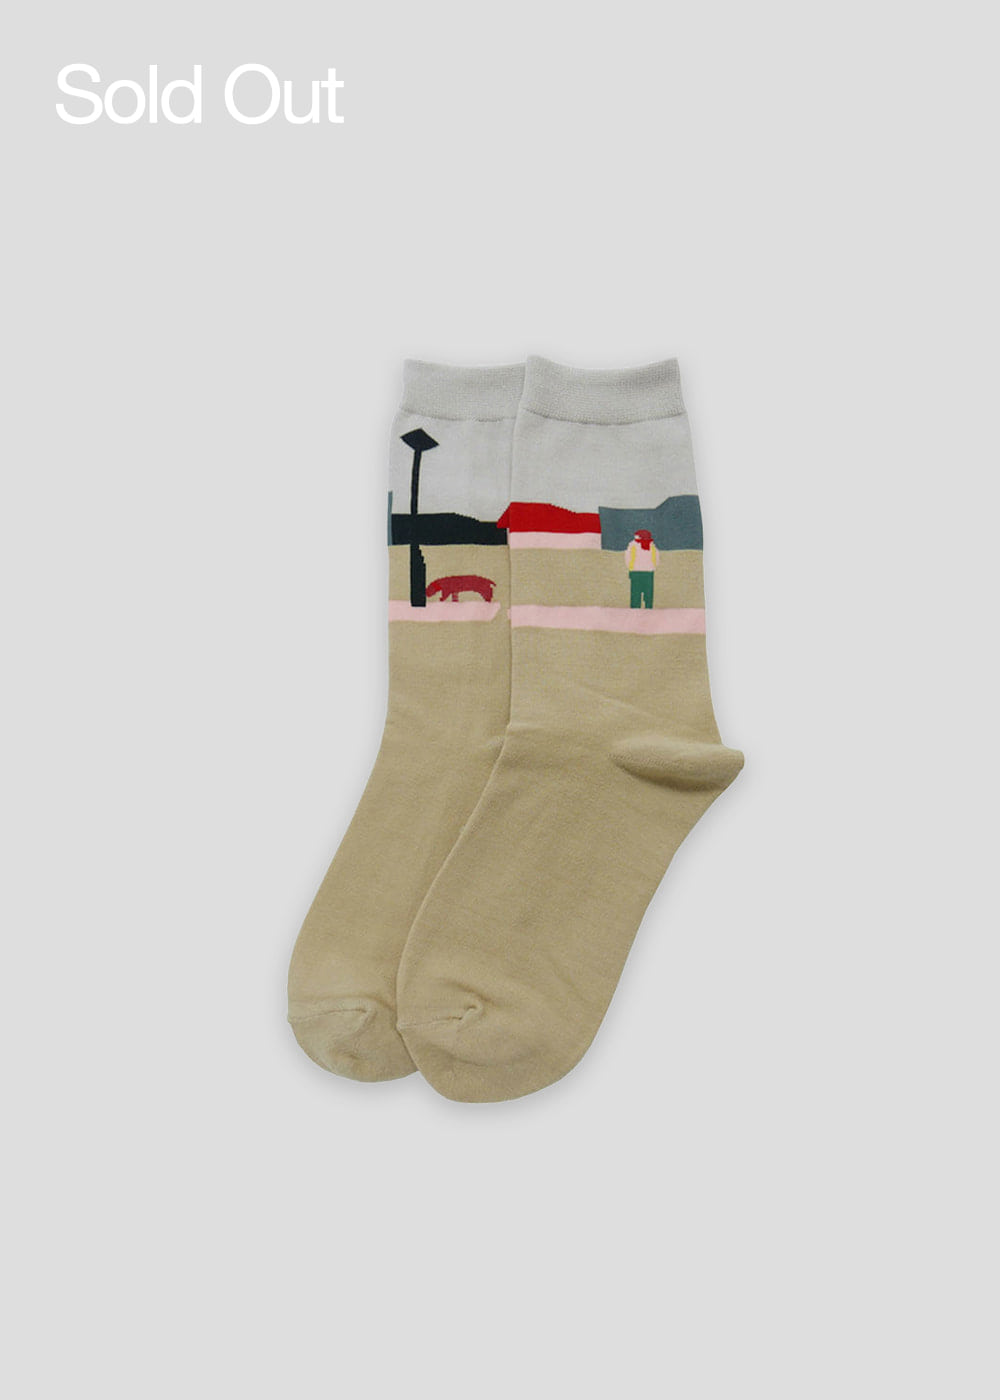 PINZLE x IHM Socks - The Afternoon of Winter